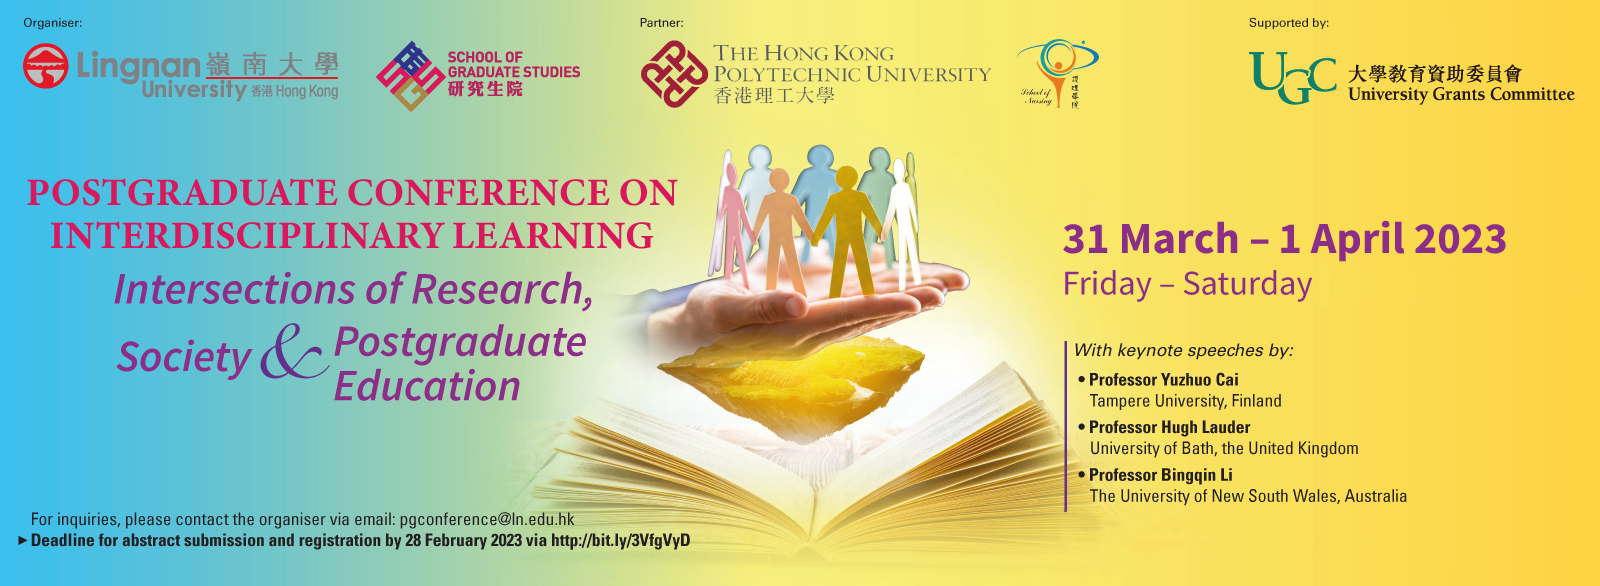 Postgraduate Conference on Interdisciplinary Learning: Intersections of Research, Society and Postgraduate Education